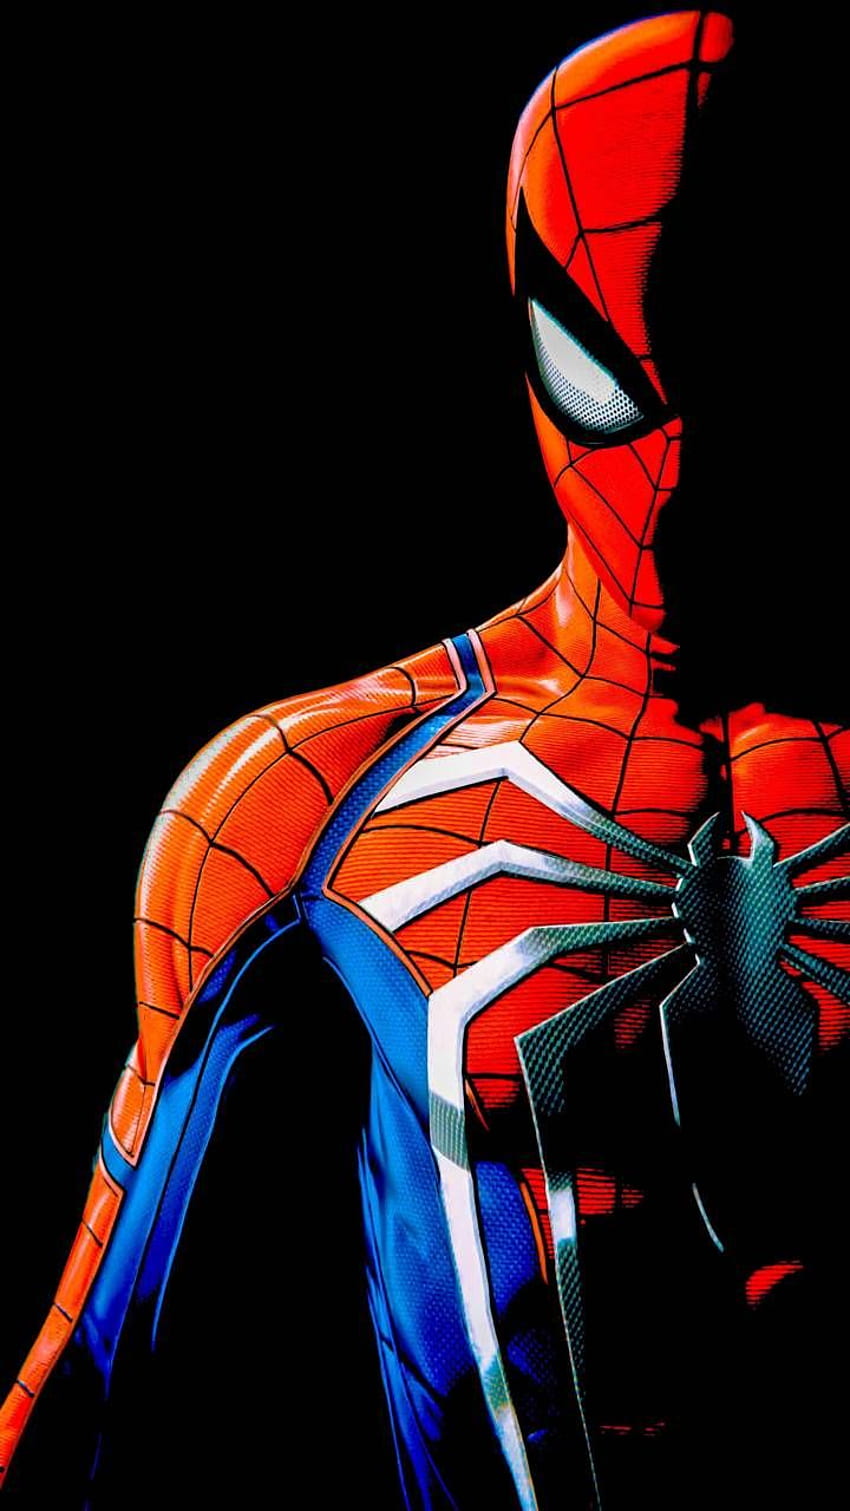 Spiderman PS4 by PERSONAL1ZED - 16 now. Browse millions of popular amoled. Marvel spiderman art, Spiderman artwork, Spiderman, Spider Man Amoled HD phone wallpaper